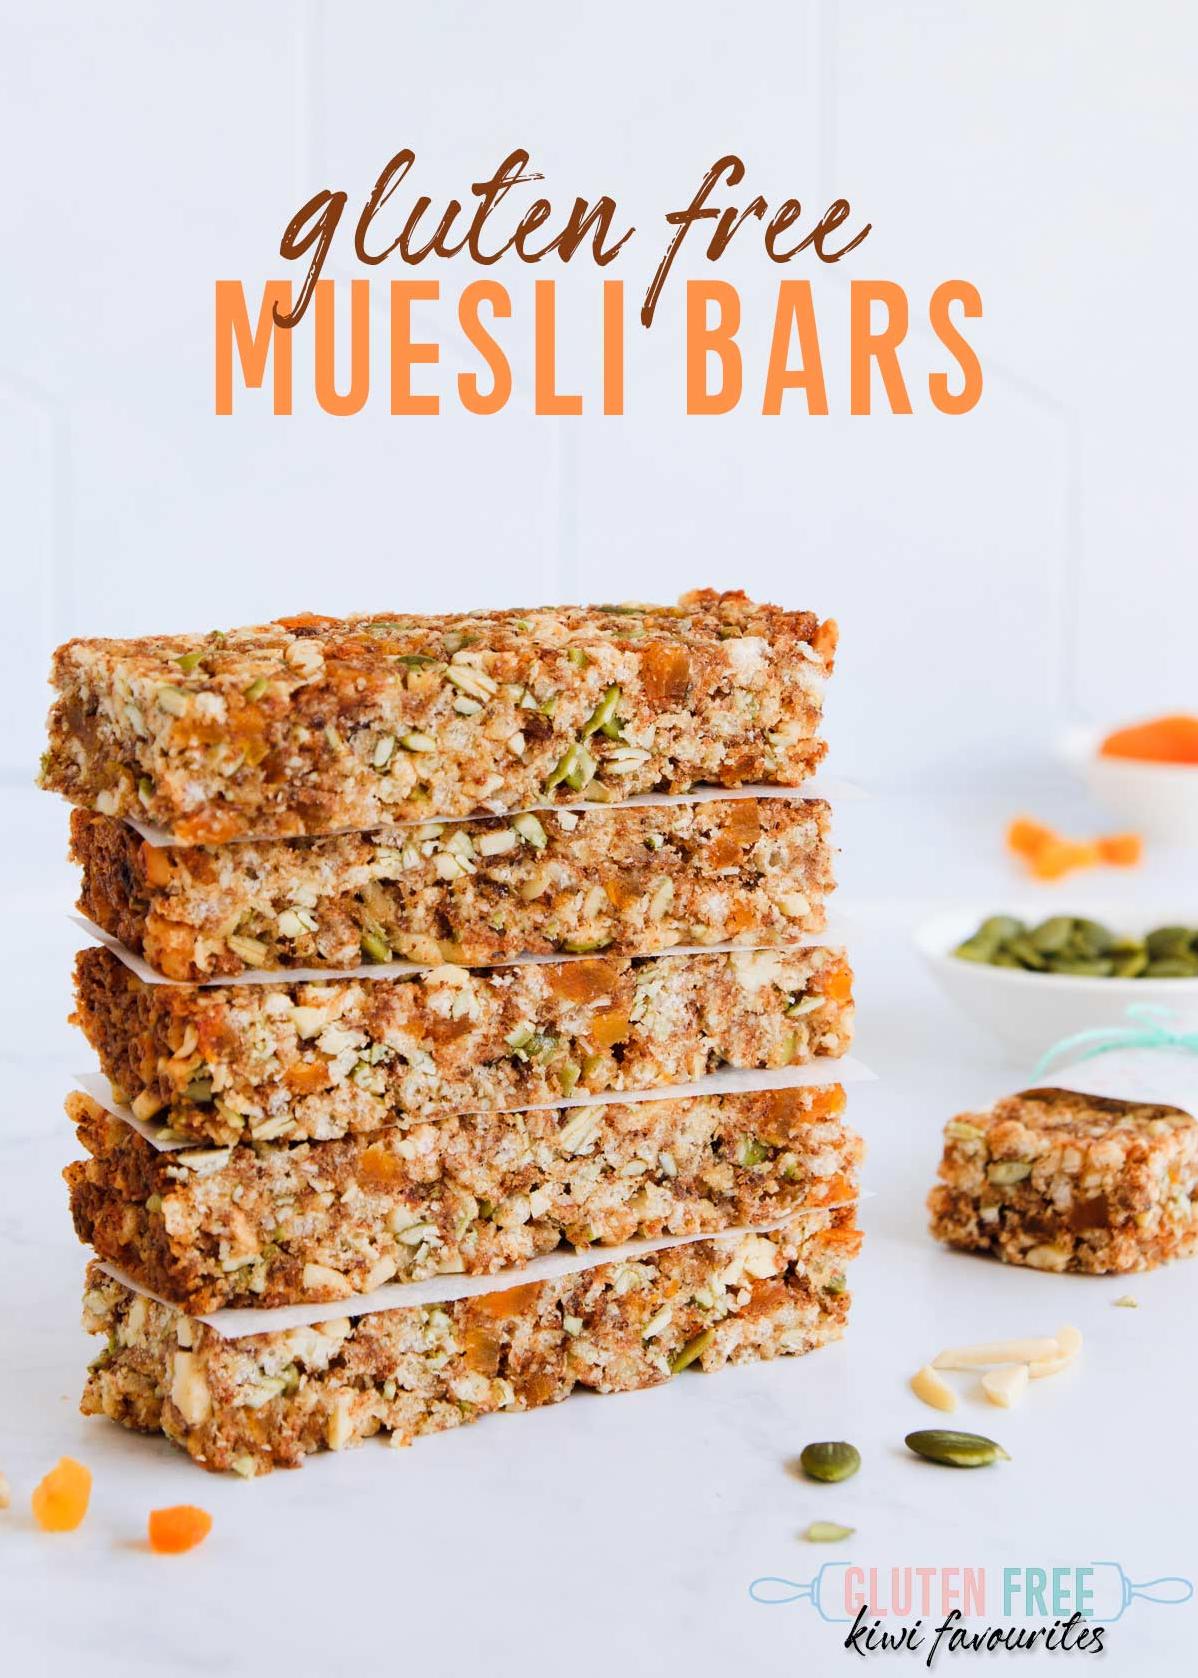  Satisfy your snack cravings with these delicious gluten-free Muesli Bars.